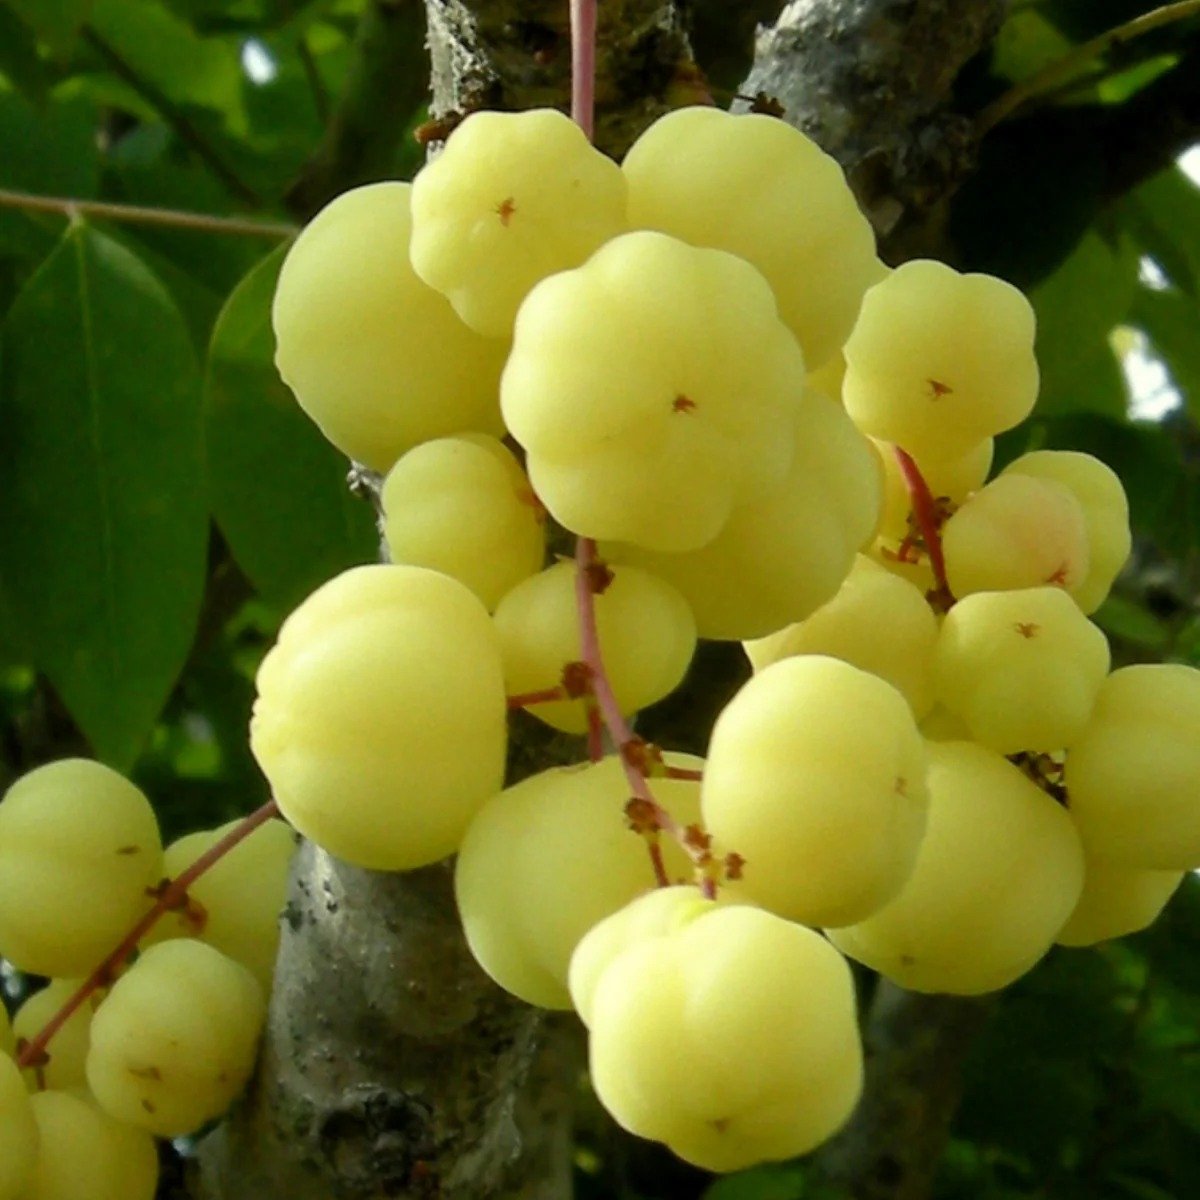 Yellow Otaheite Gooseberry fruits clustered on a tree branch.